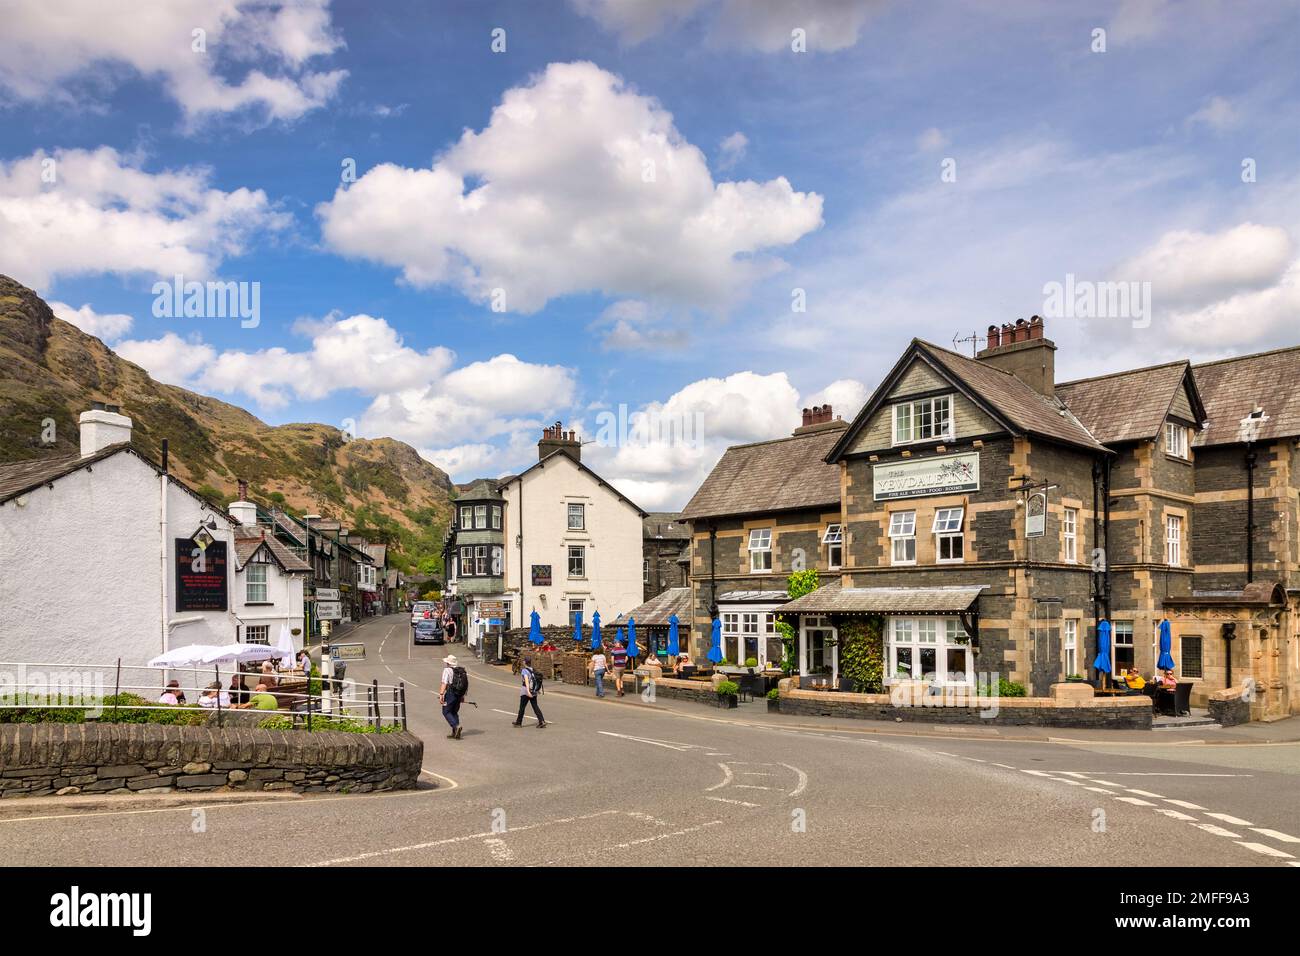 18 May 2022: Coniston, Cumbria, UK - The centre of Coniston, popular village in the English Lake District, and the Yewdale Inn. People sitting outside... Stock Photo